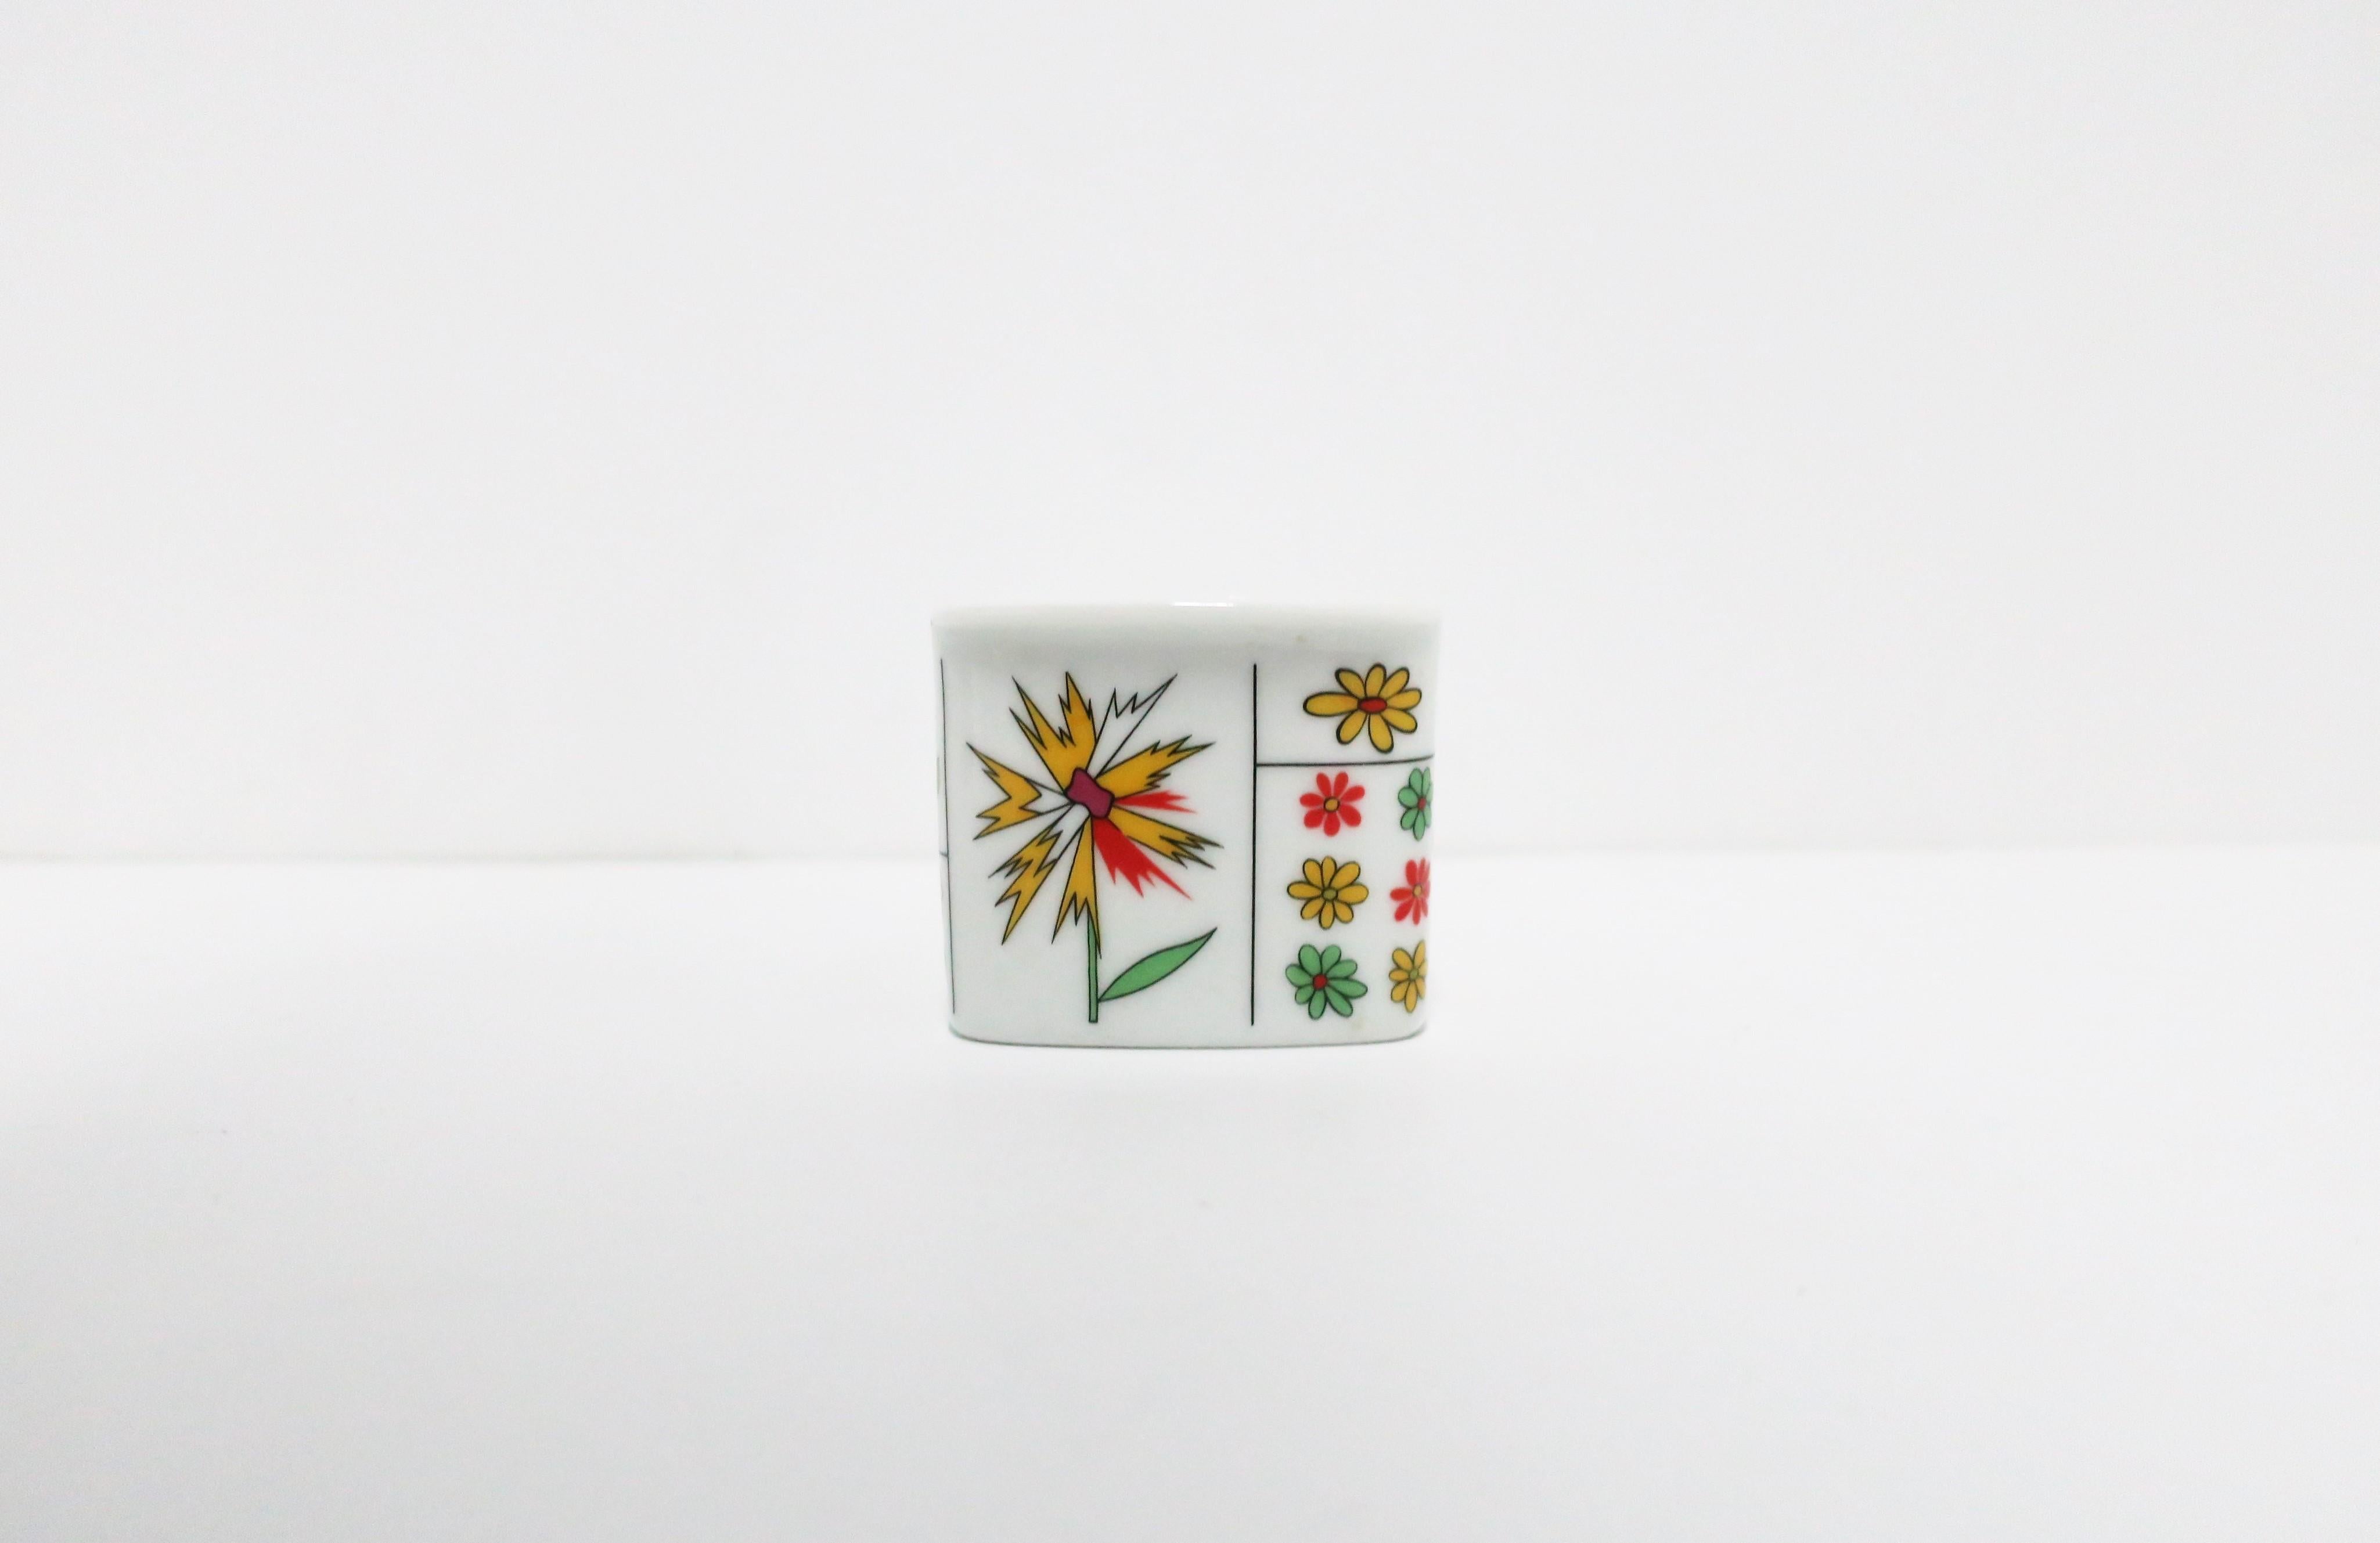 A small and beautiful Hans Theo Baumann and Emilio Pucci designed porcelain vessel for Rosenthal 'Studio-Linie', Berlin, circa late 20th century, Germany. Piece is a glazed white porcelain with a colorful flower and leaf design; a collaboration of